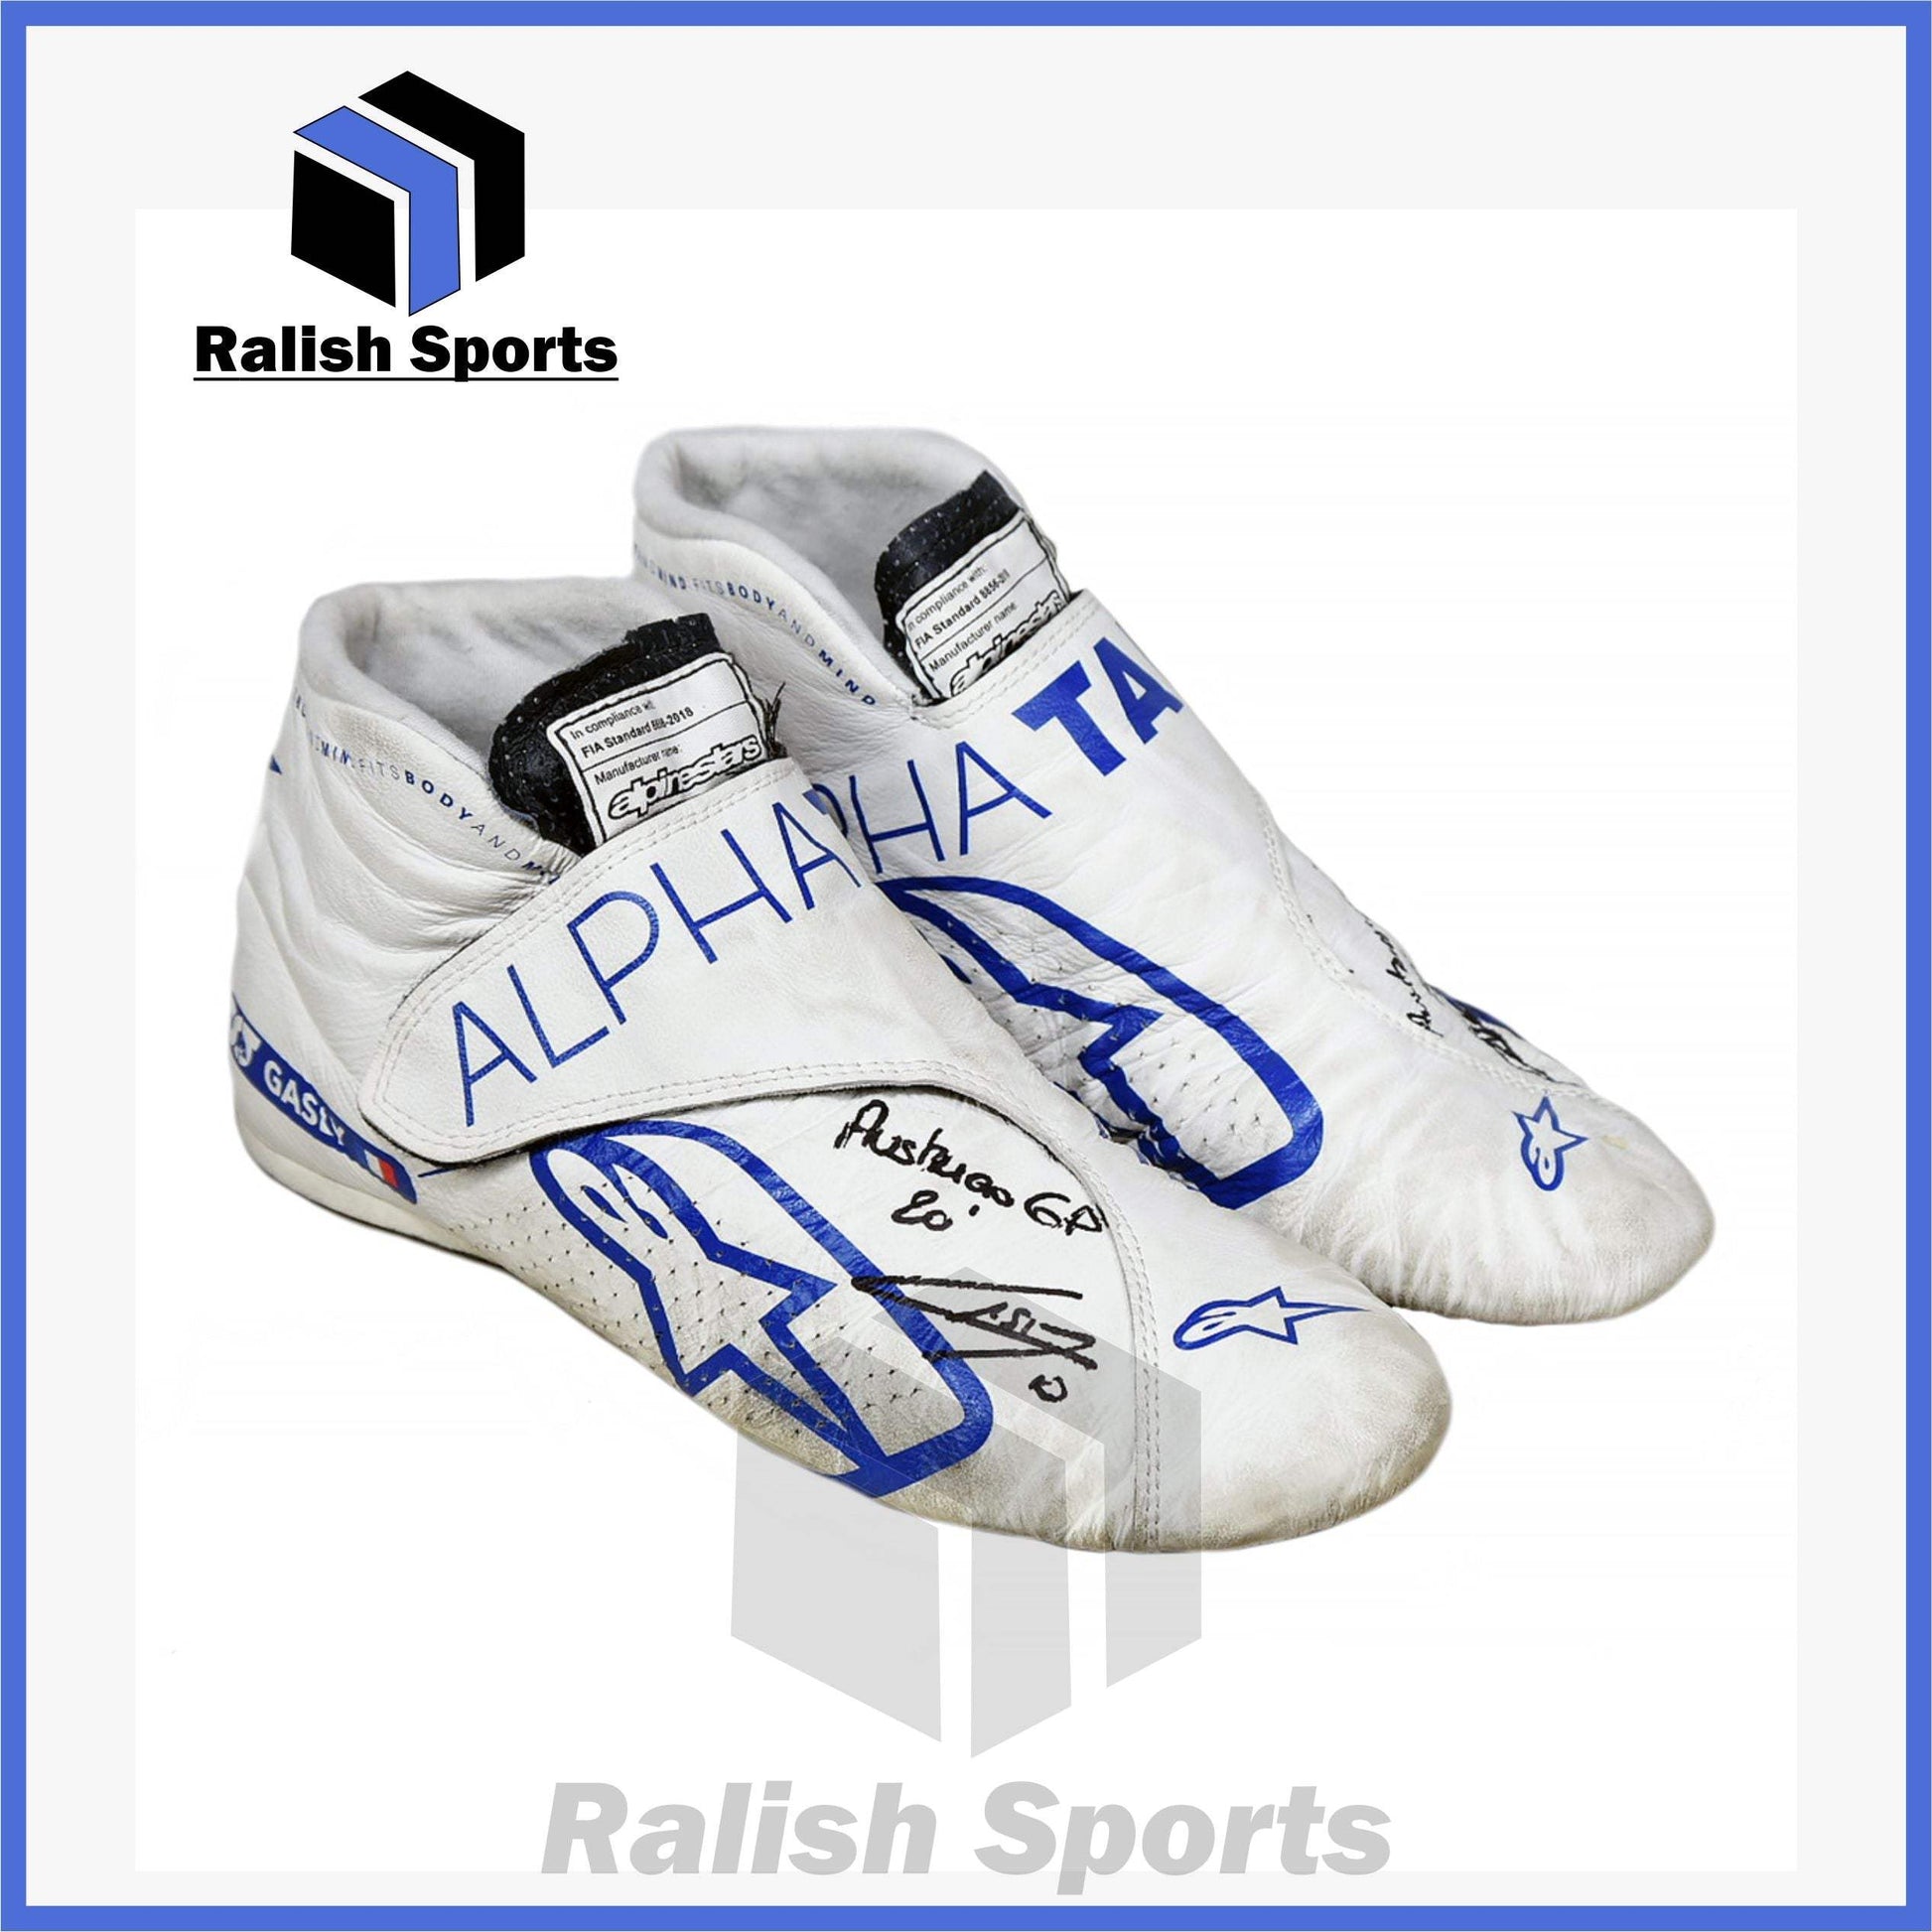 PIERRE GASLY Race Shoes 2020 - Ralish Sports